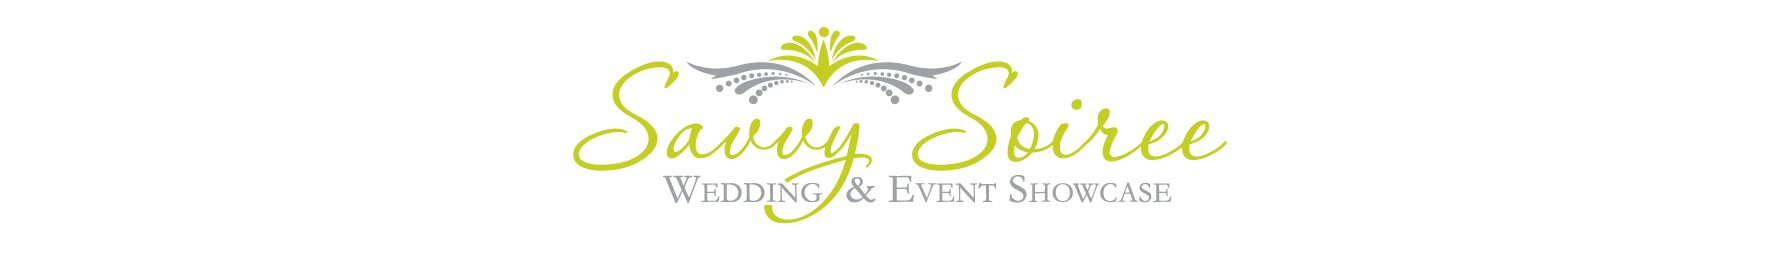 Savvy Soiree – Wedding and Event Showcase – Florence Civic Center SC